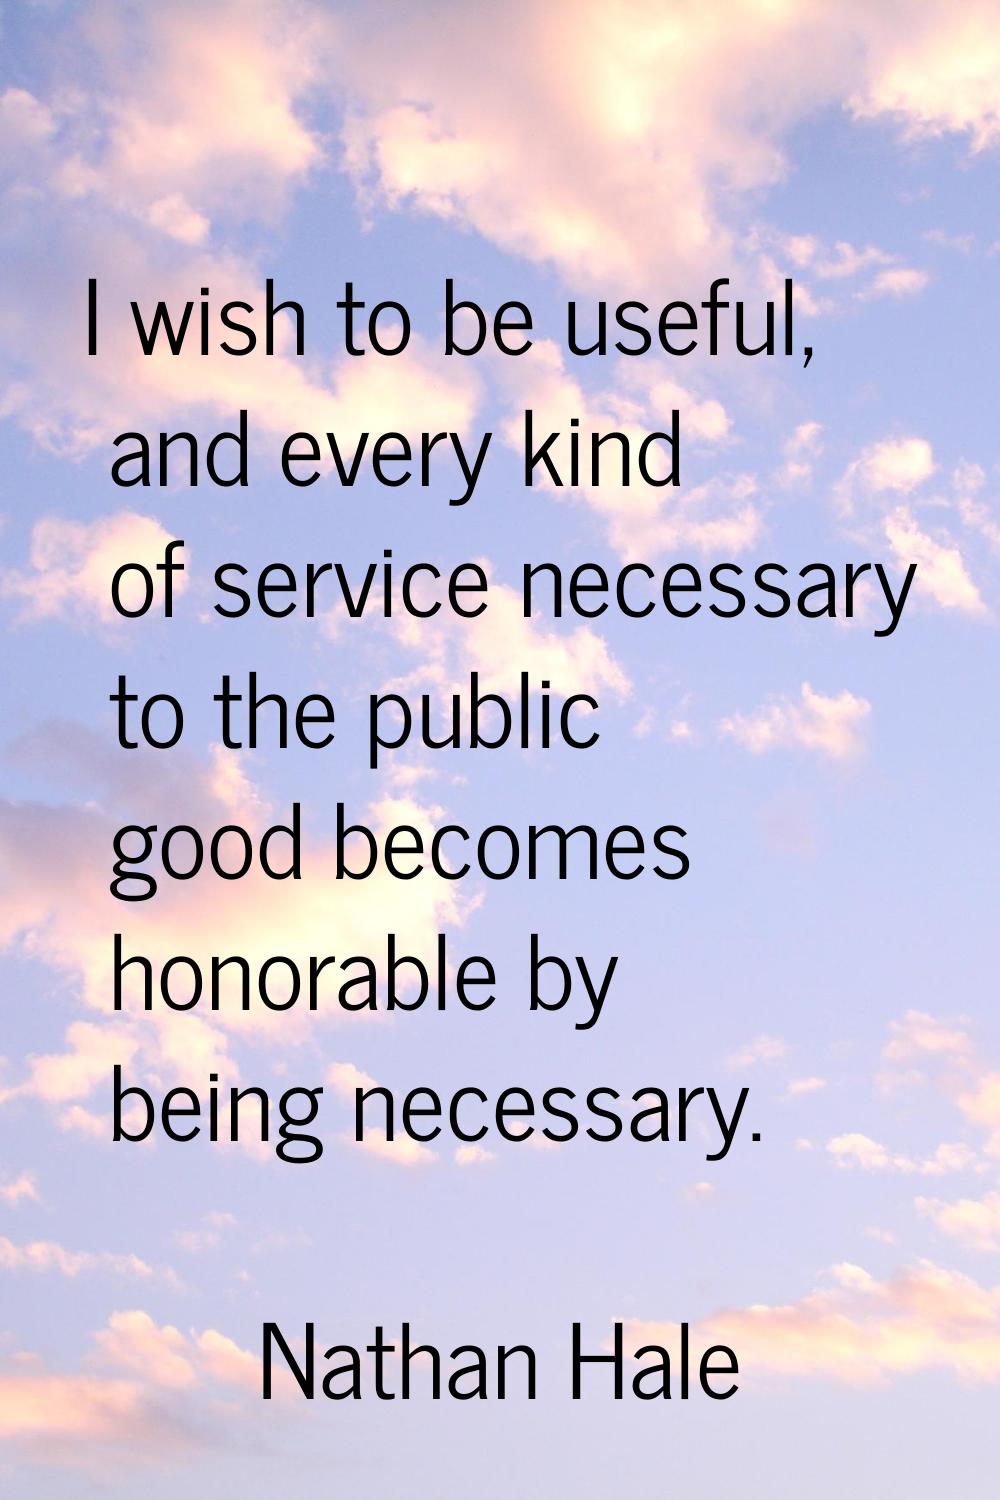 I wish to be useful, and every kind of service necessary to the public good becomes honorable by be